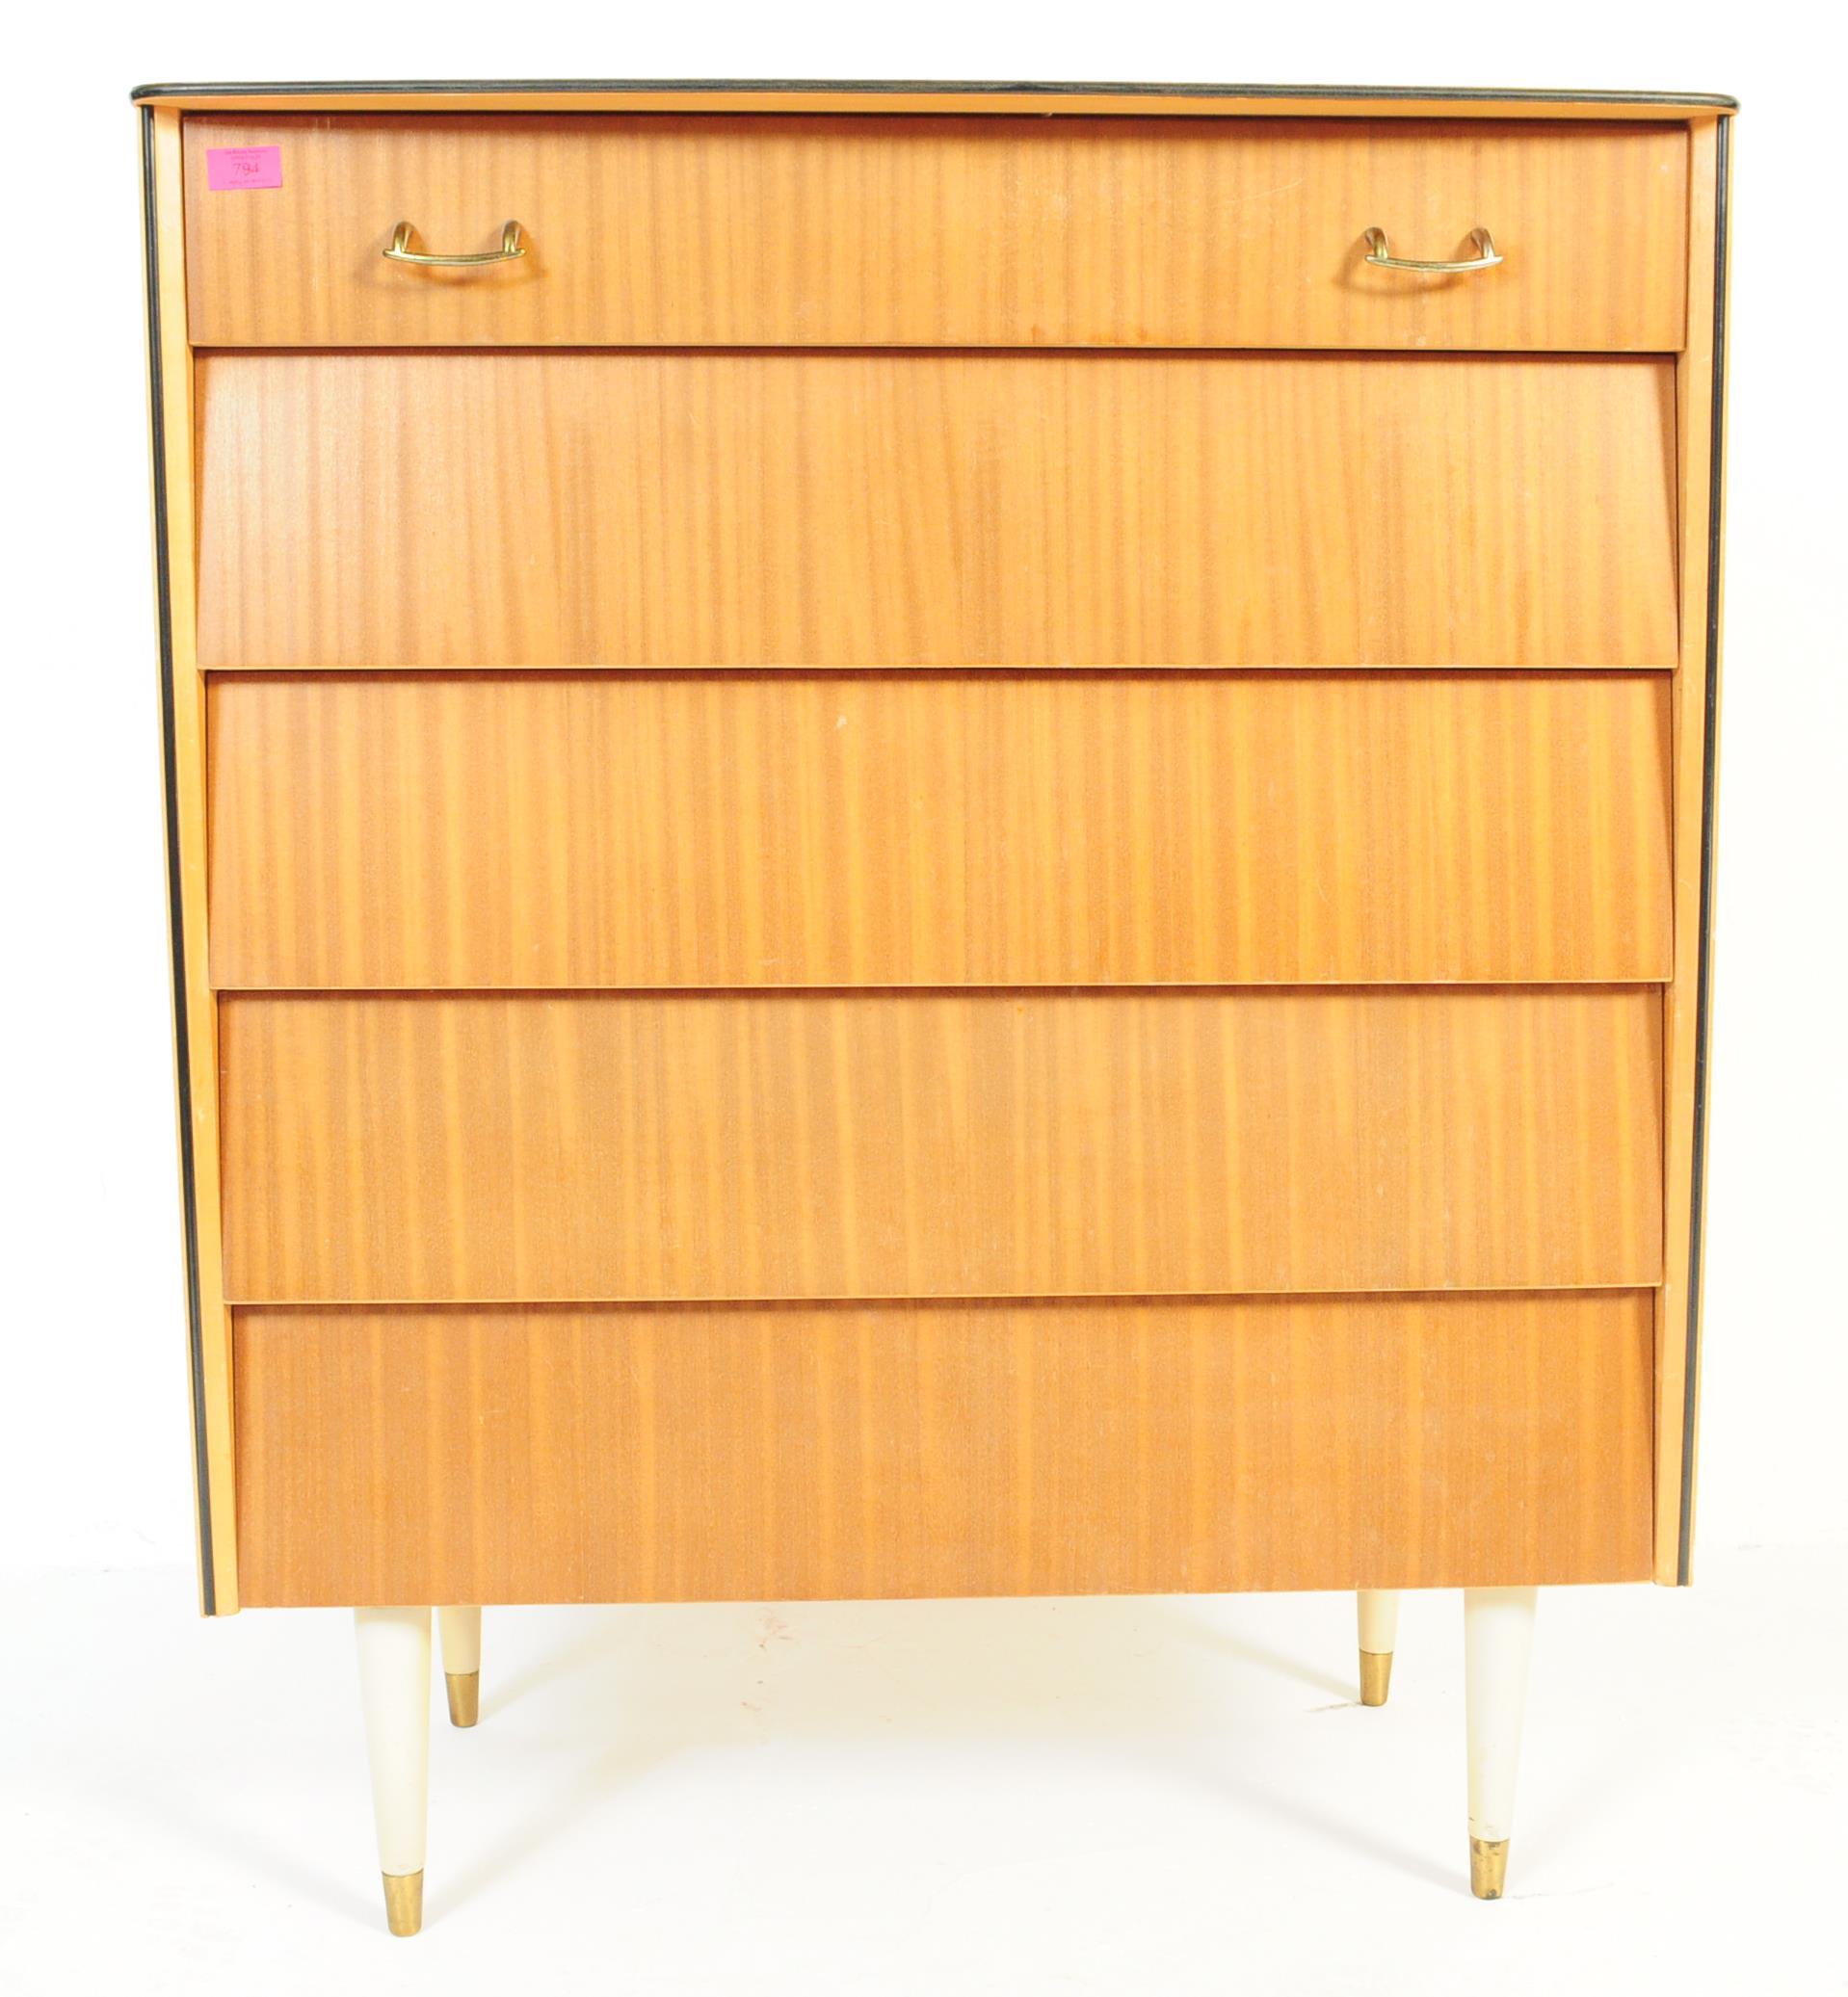 MID CENTURY AVALON TEAK BEEHIVE CHEST OF DRAWERS - Image 3 of 6